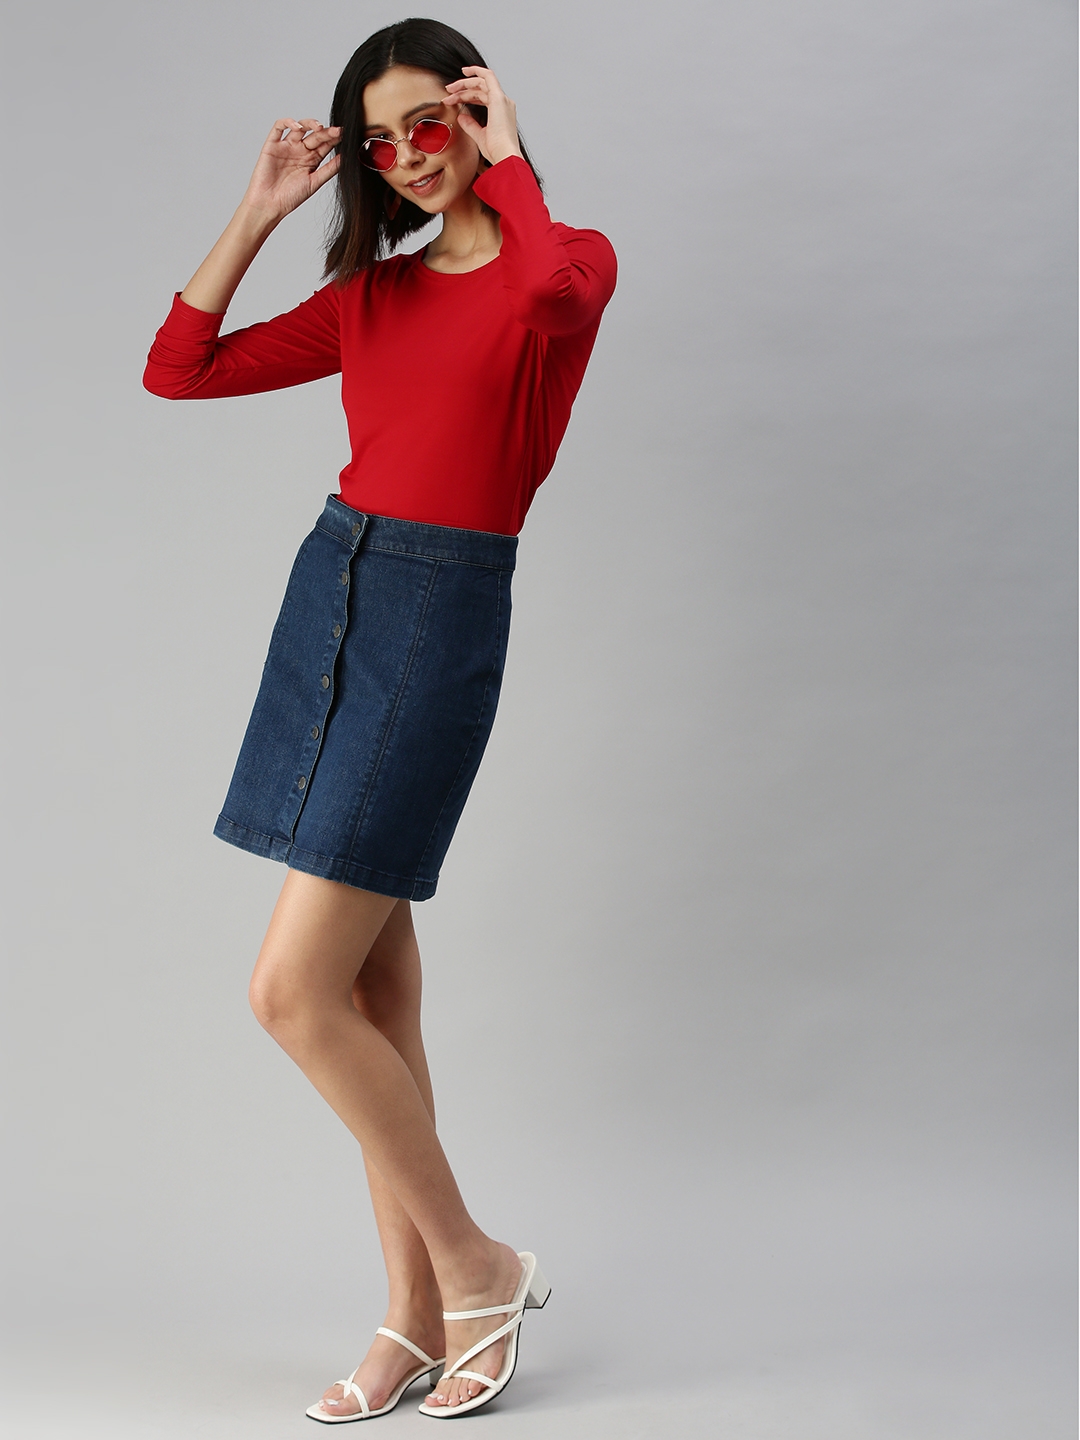 Women's Red Cotton Blend Solid Tops